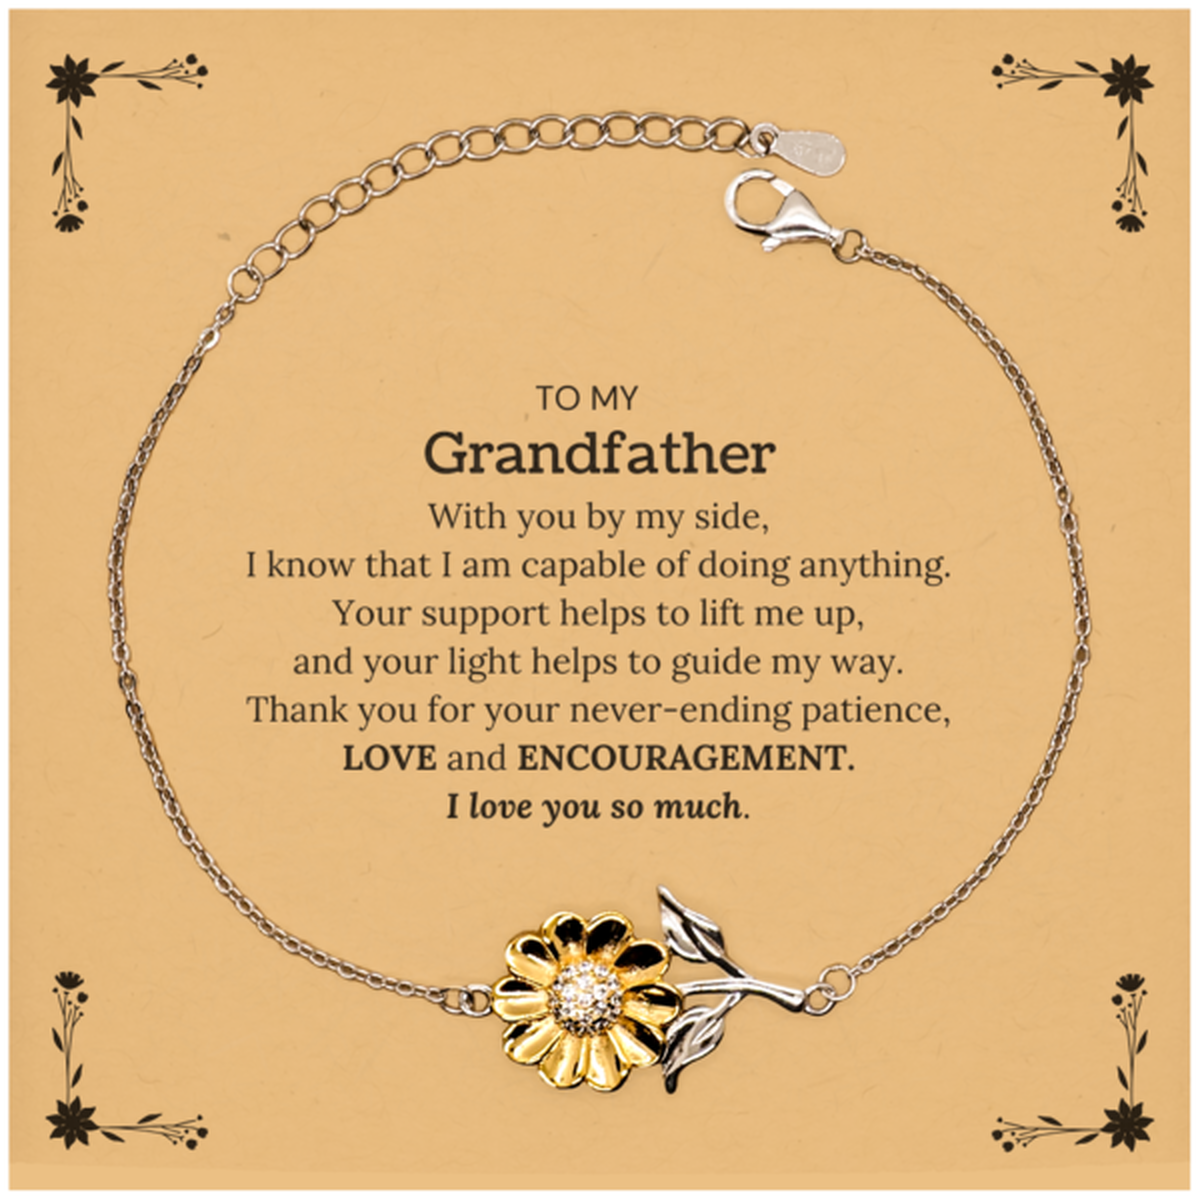 Appreciation Grandfather Sunflower Bracelet Gifts, To My Grandfather Birthday Christmas Wedding Keepsake Gifts for Grandfather With you by my side, I know that I am capable of doing anything. I love you so much